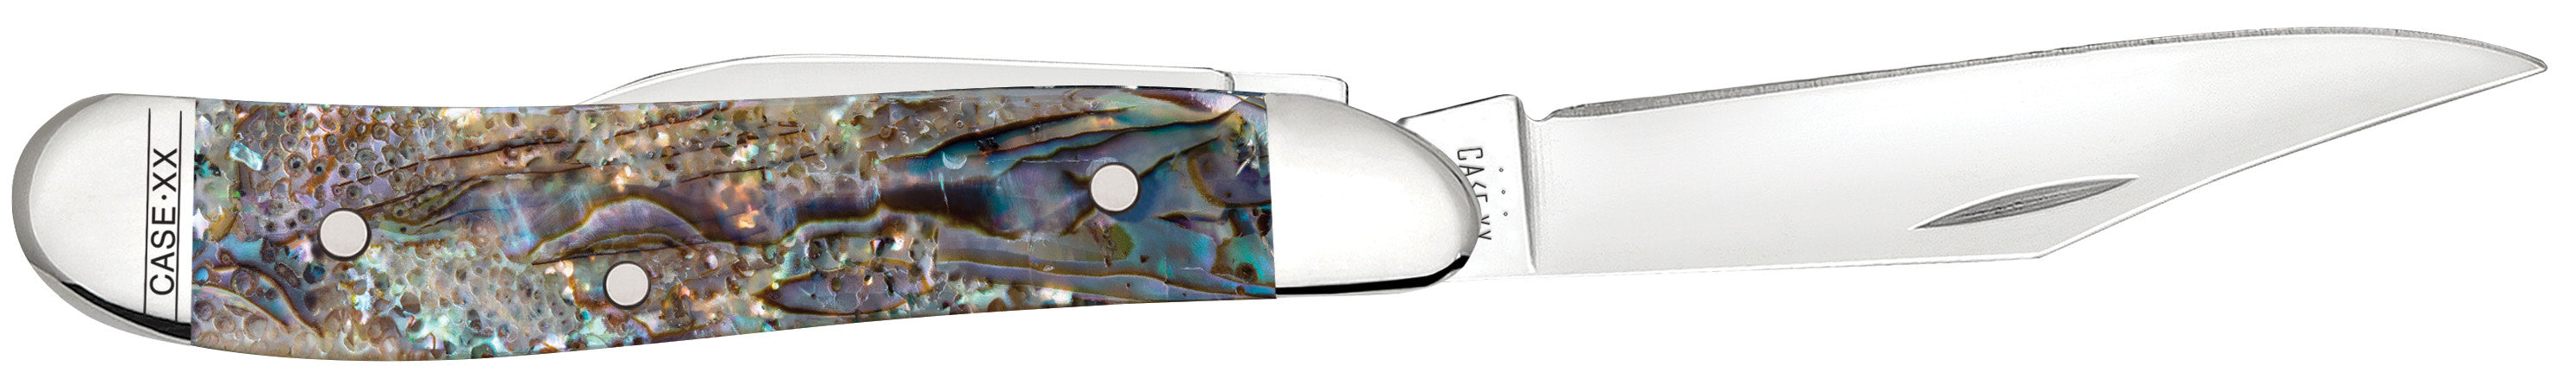 Smooth Abalone Peanut Knife Open